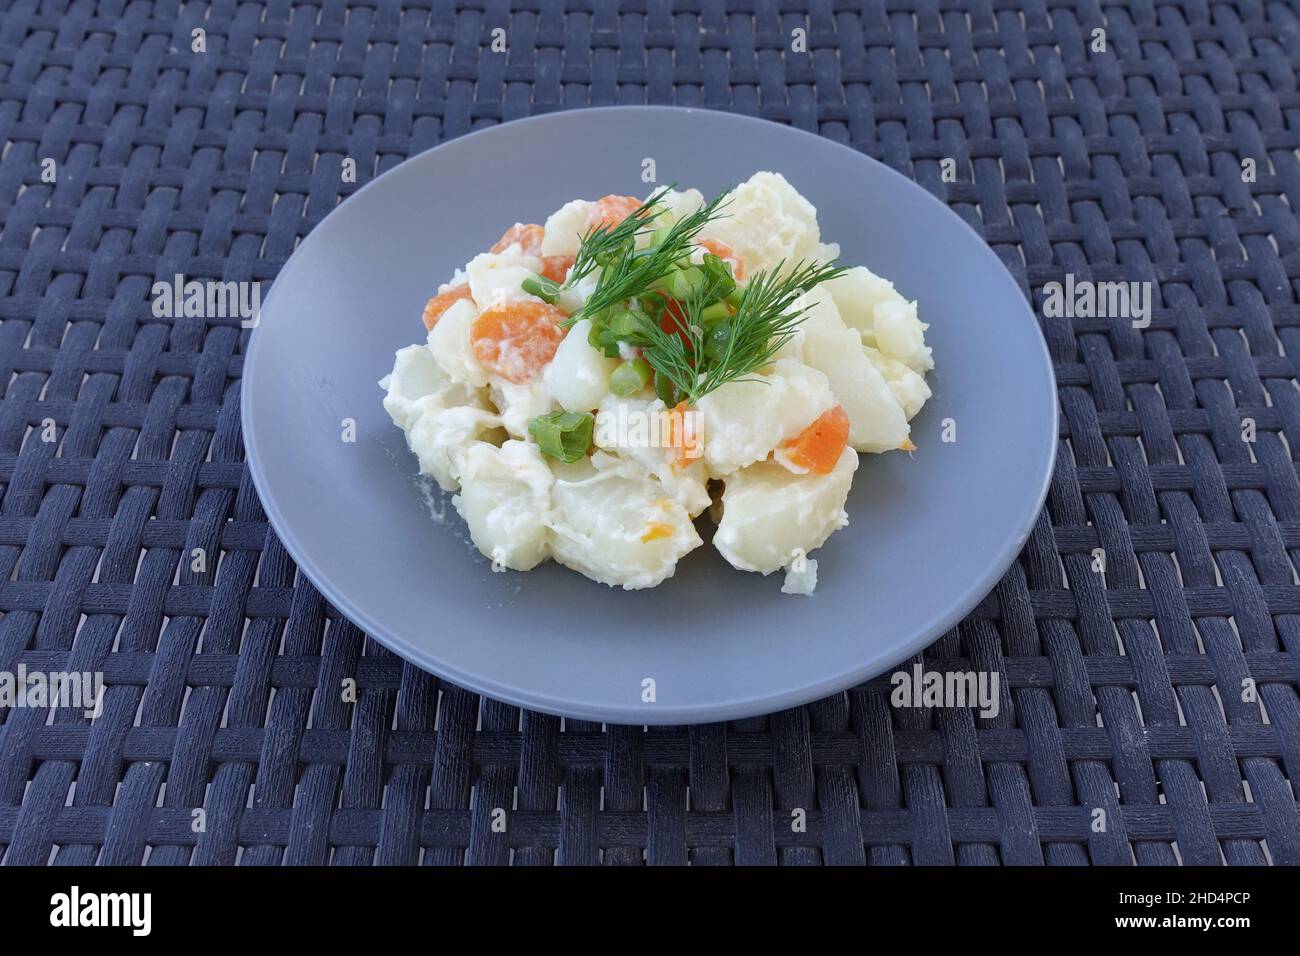 Potato salad with mayonnaise carrots green onions and dill. Appetizer food. Stock Photo